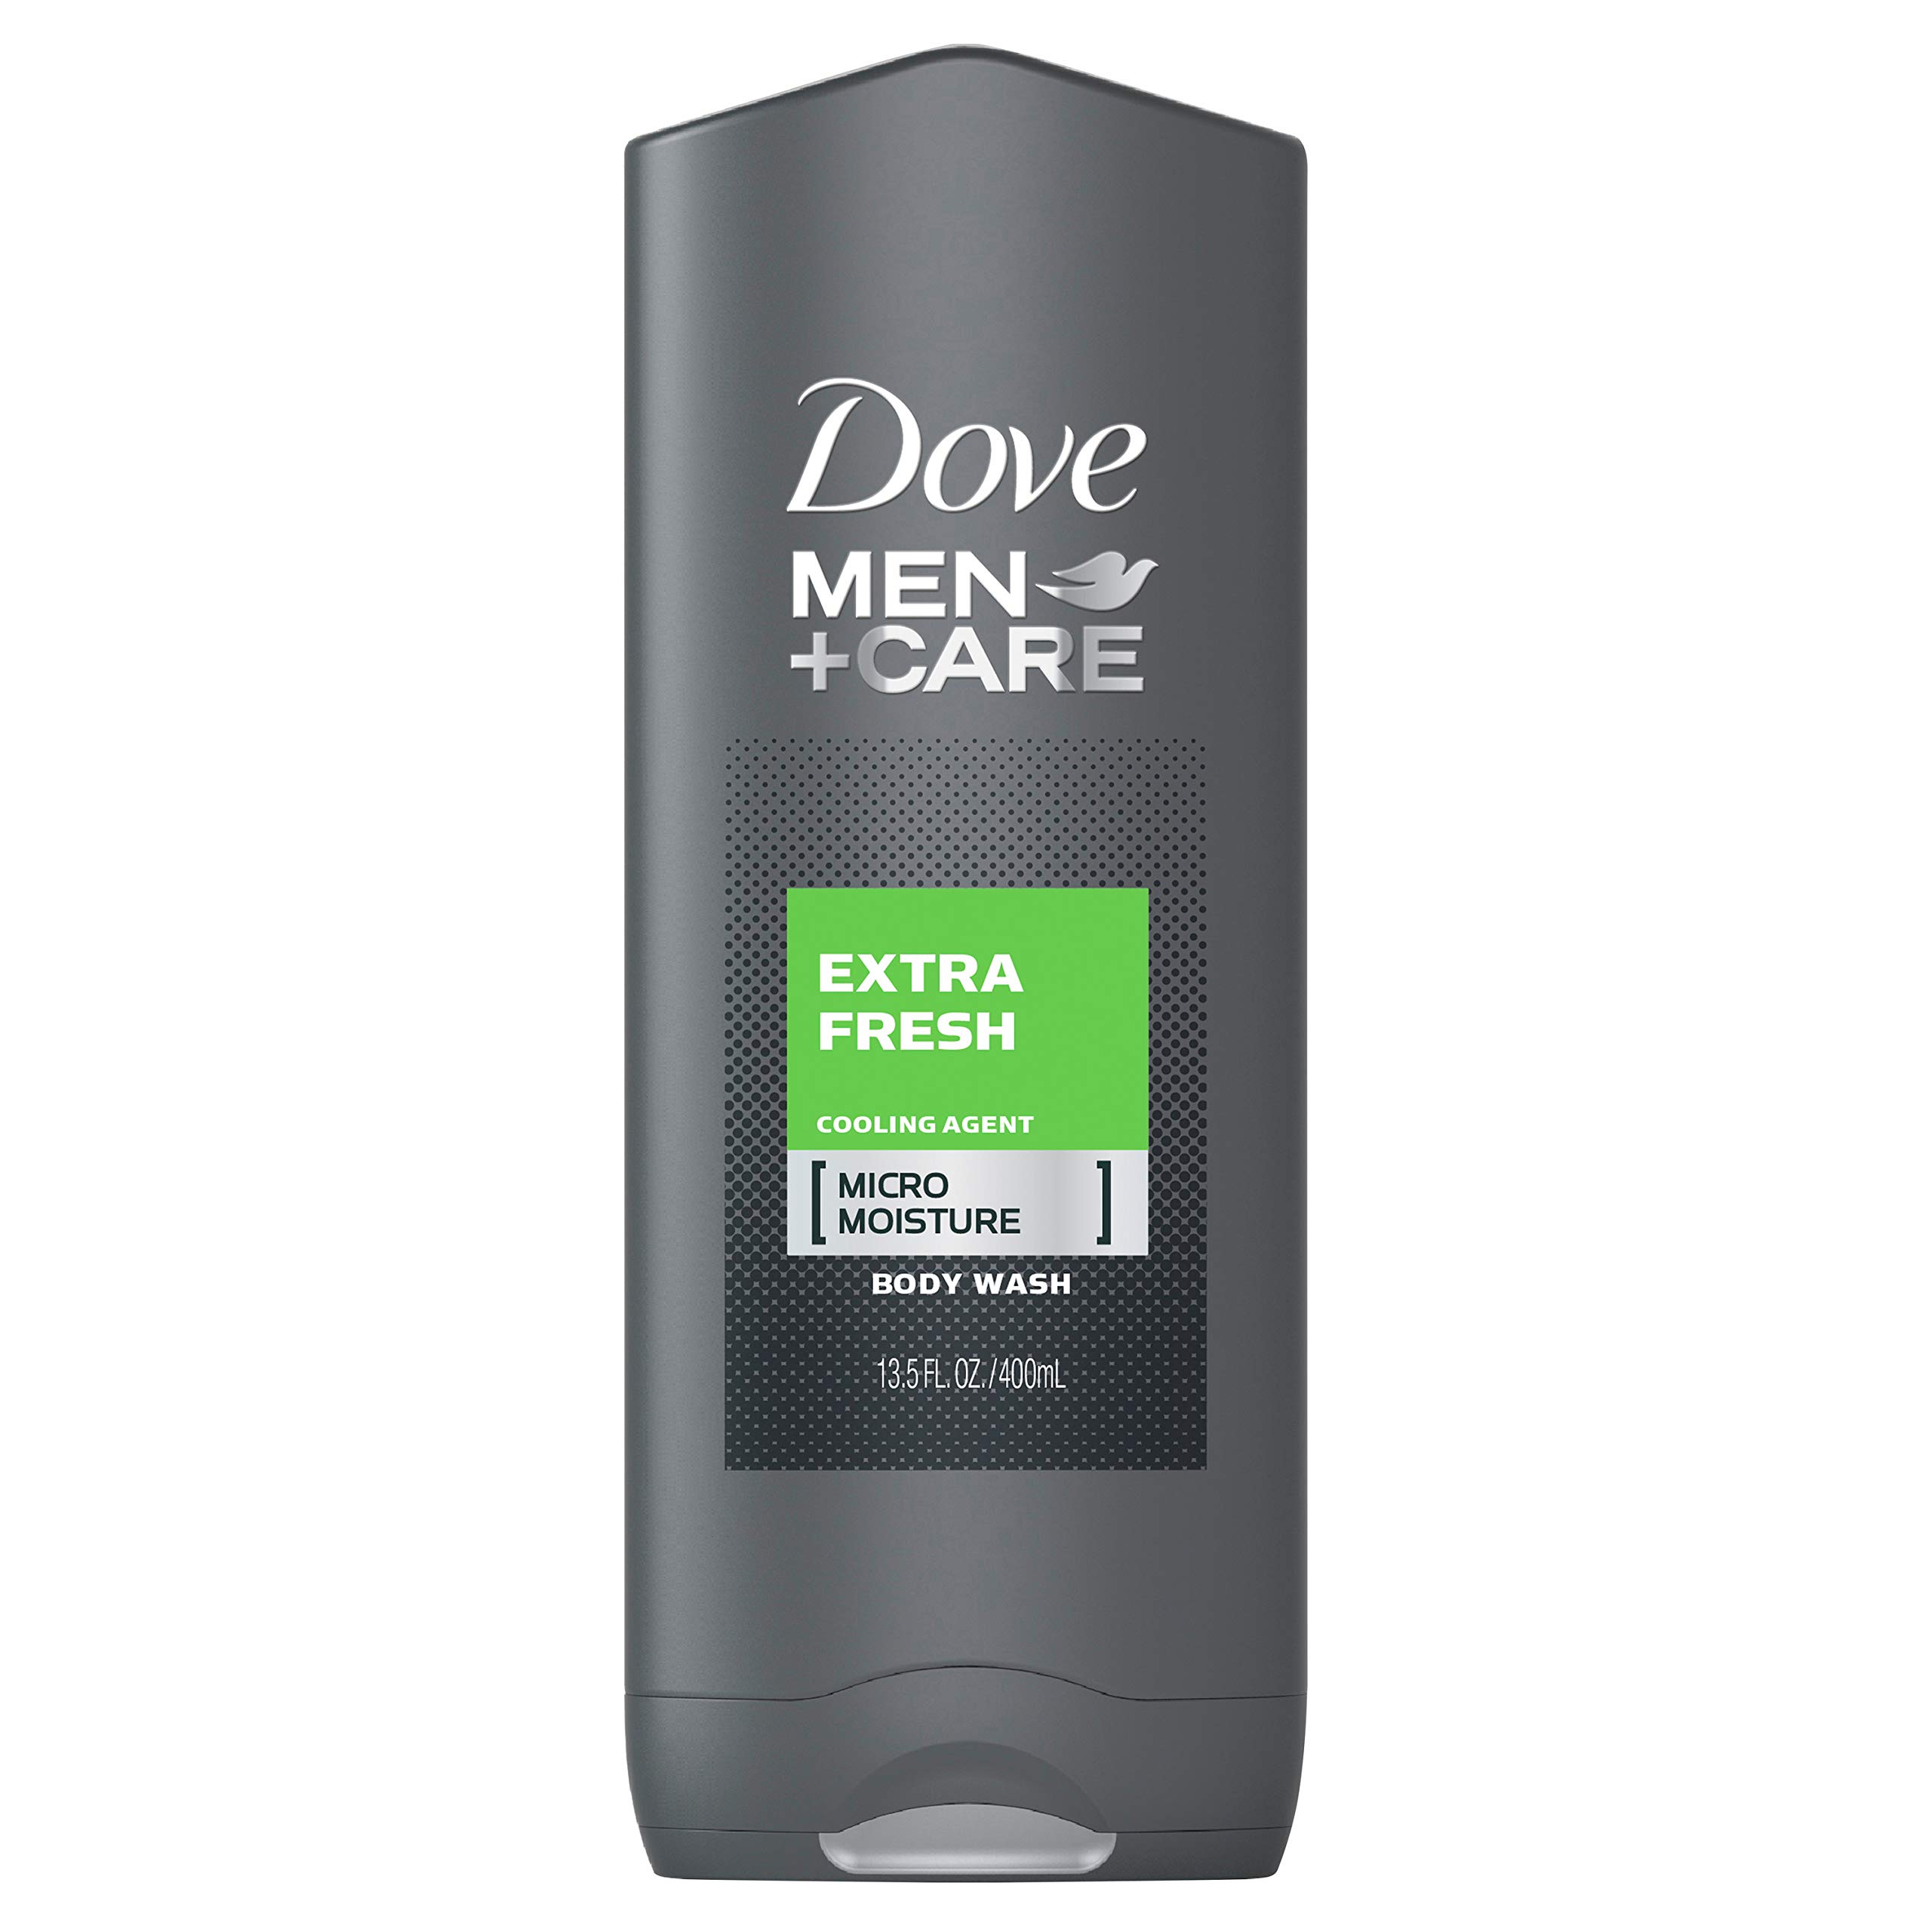 Dove Men+Care Body Wash and Face Wash For Fresh, Healthy-Feeling Skin Extra Fresh Cleanser That Effectively Washes Away Bacteria While Nourishing Your Skin 13.5 oz